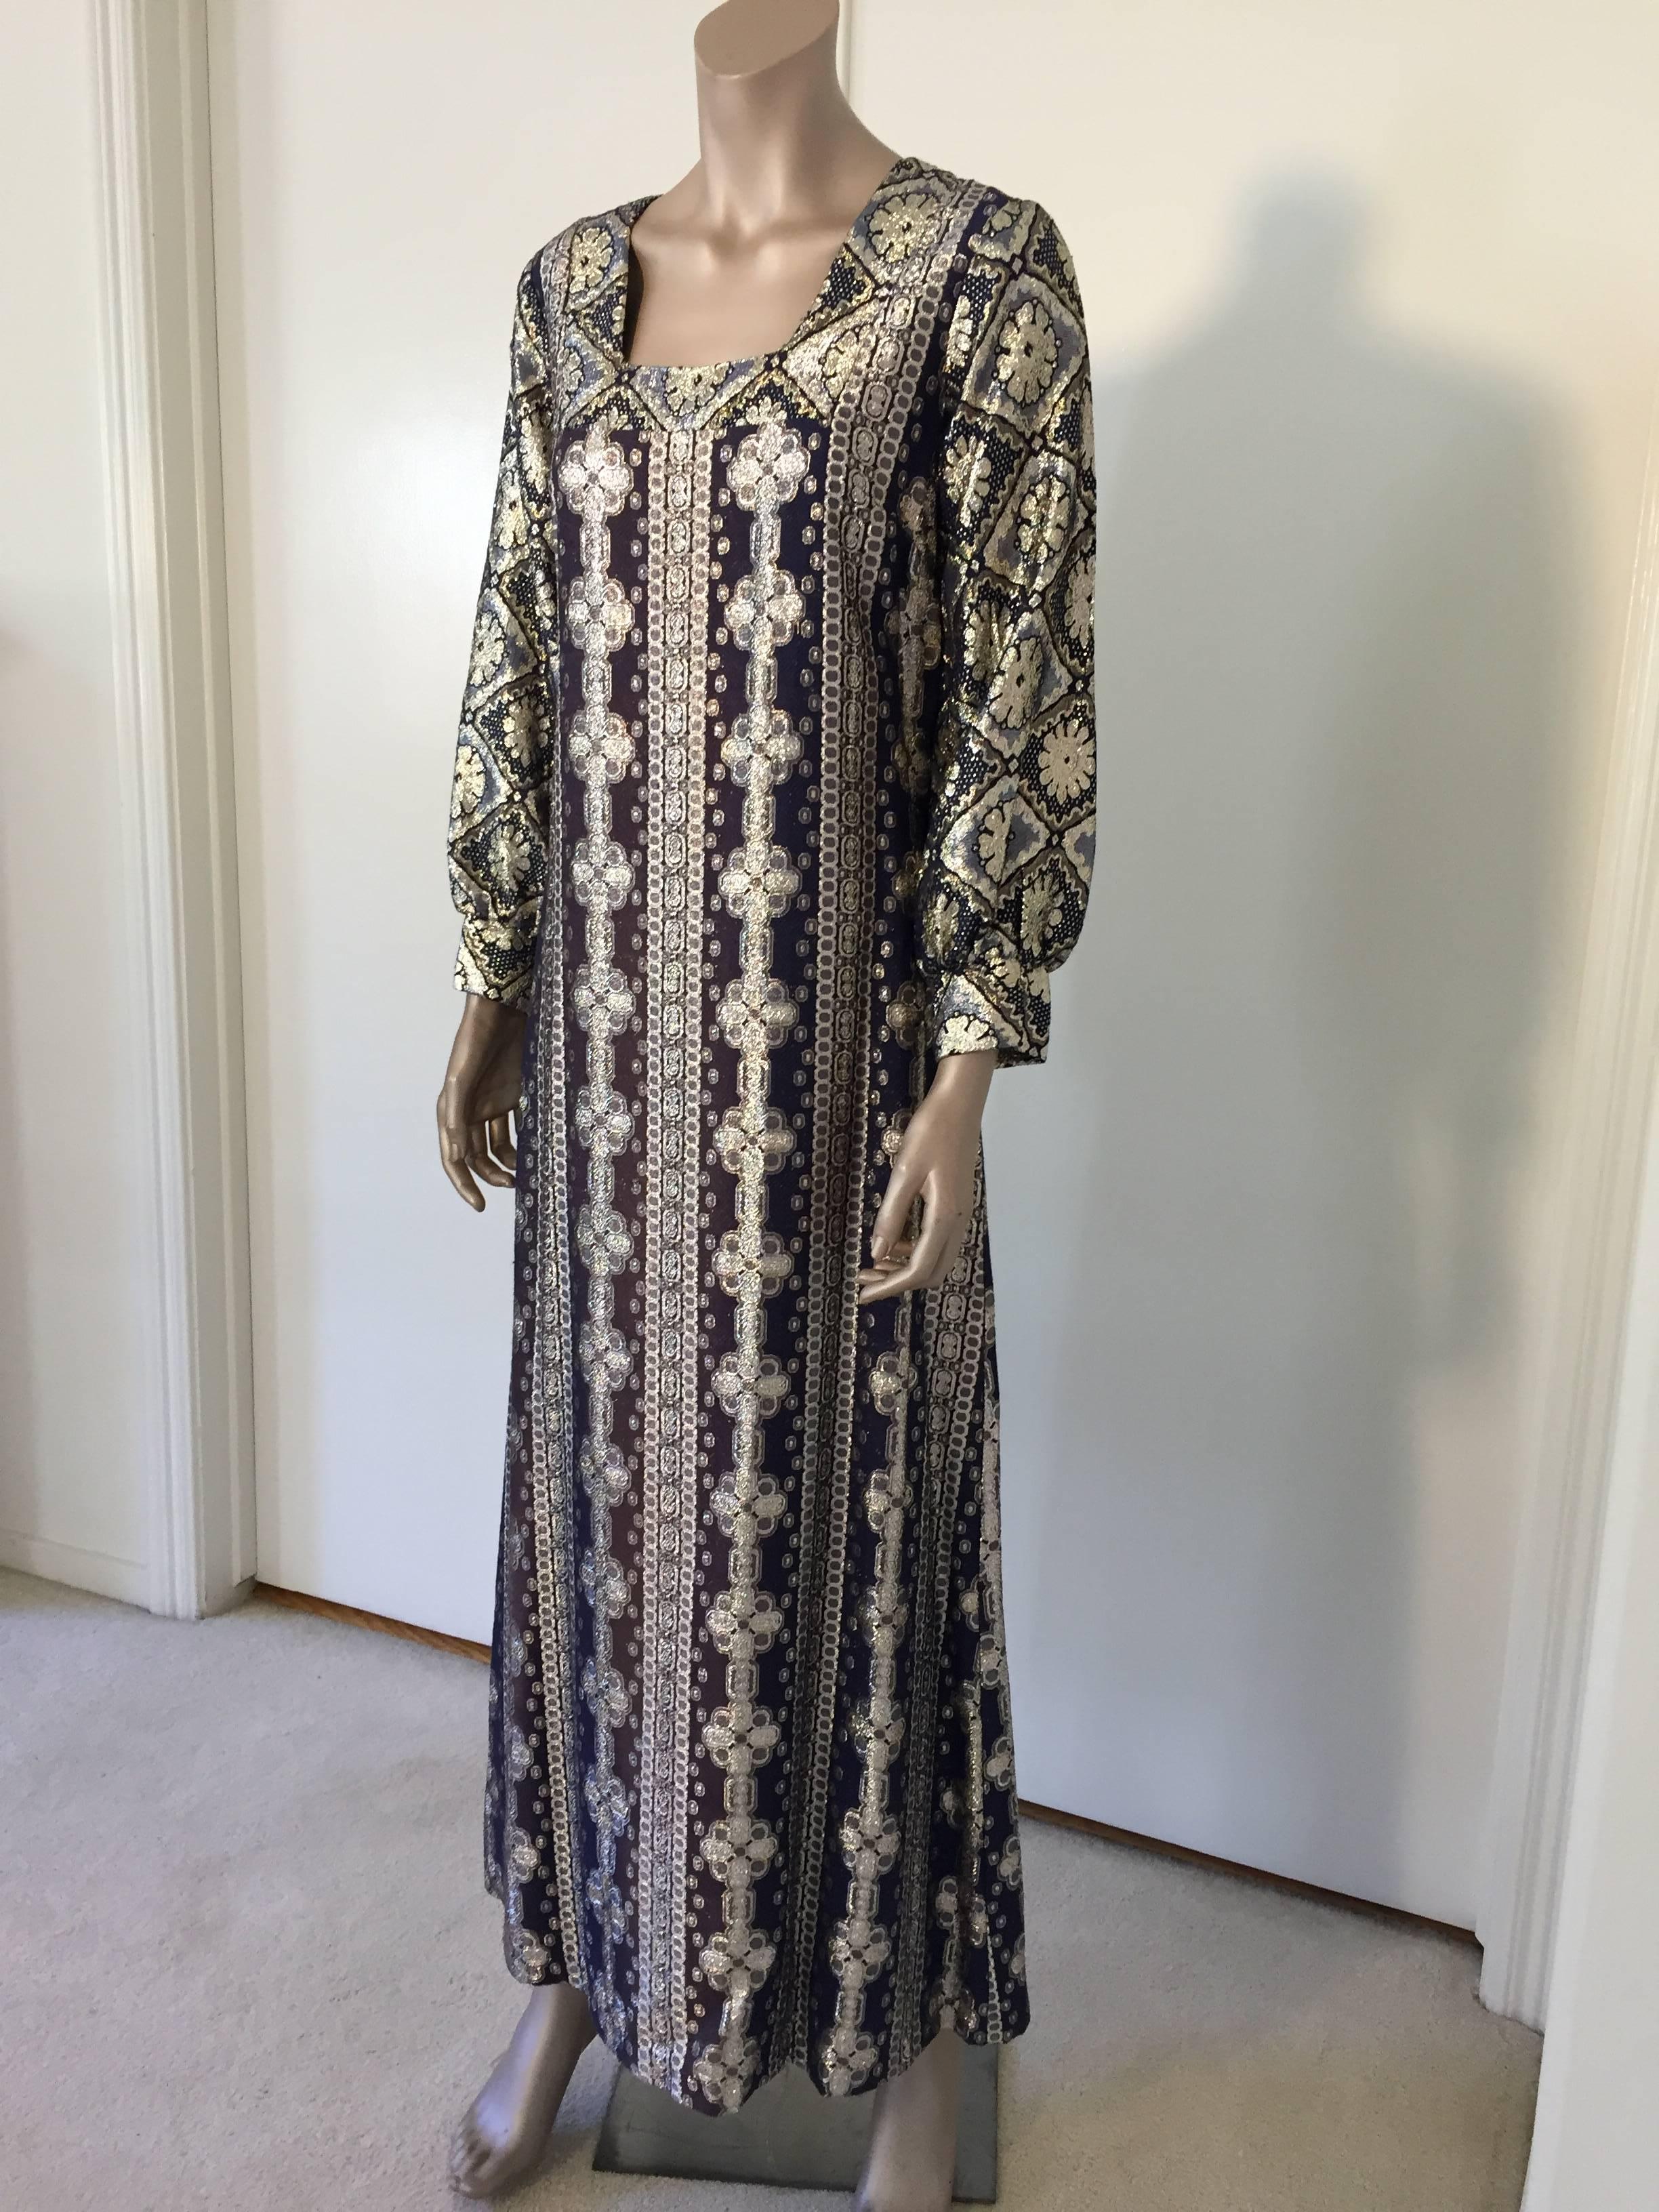 Bohemian Vintage Brocade Caftan by Bob Cunningham Nellica Beitner Neiman Marcus Size S For Sale